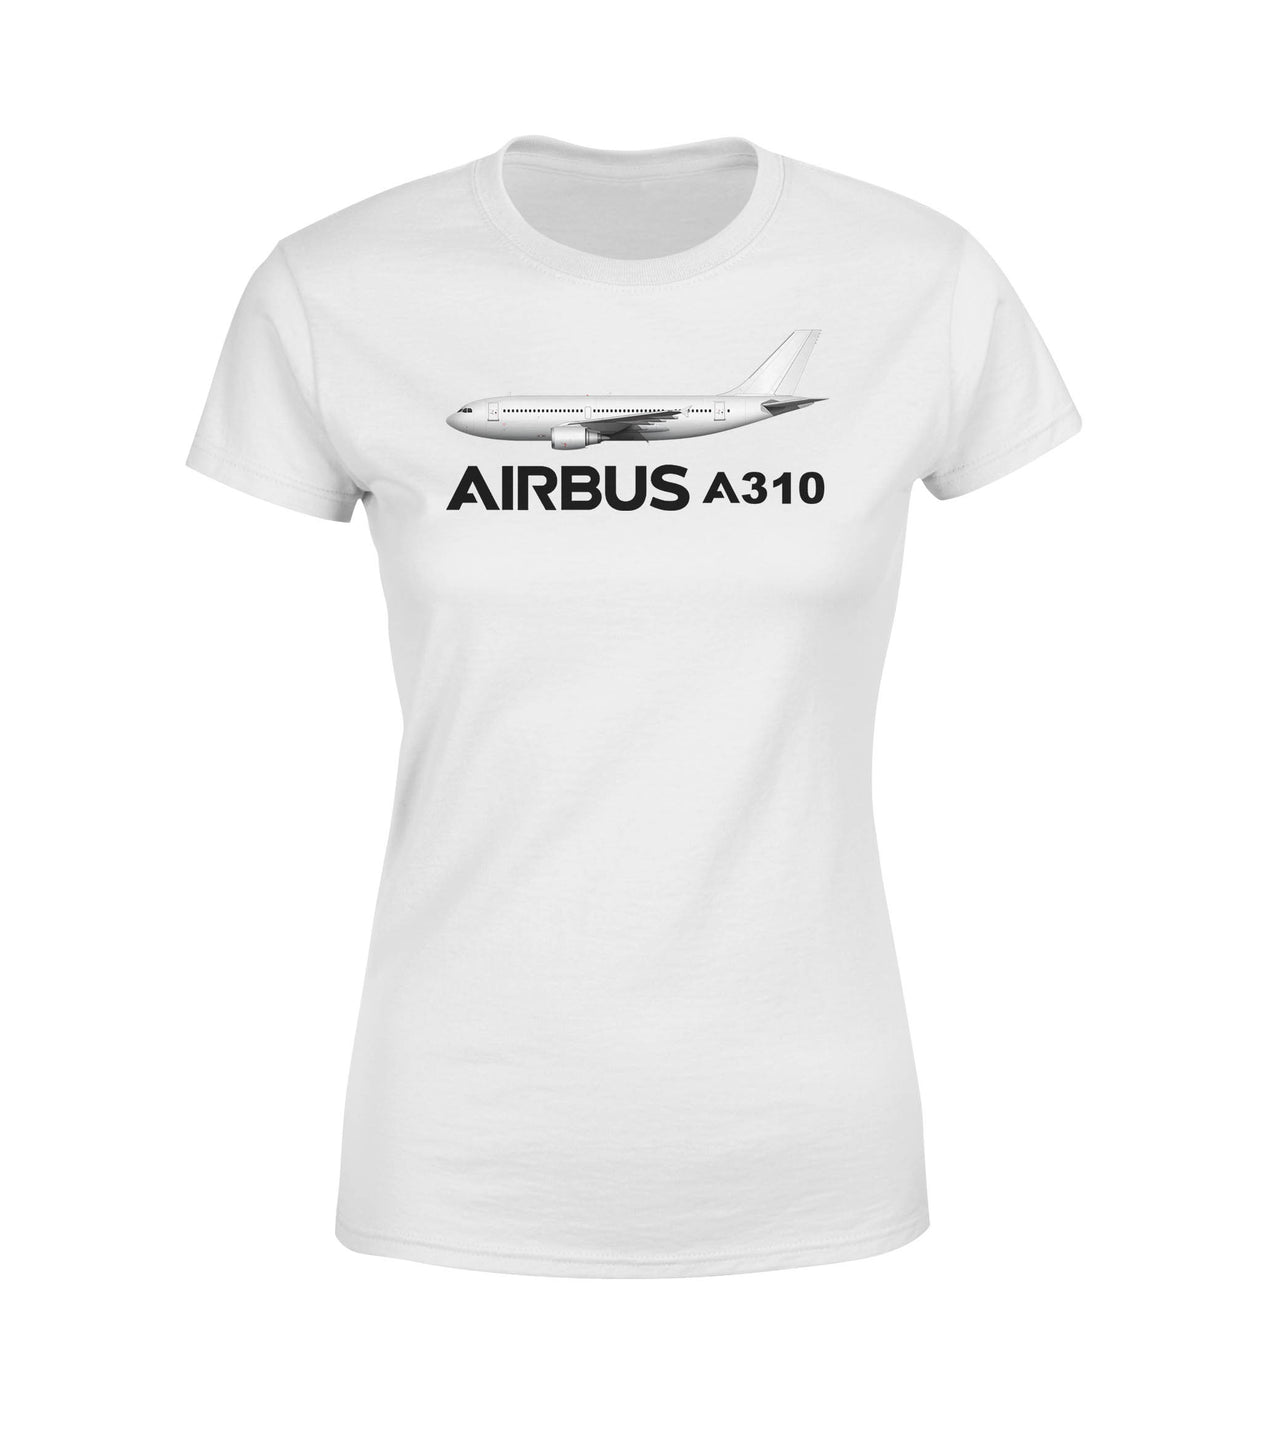 The Airbus A310 Designed Women T-Shirts